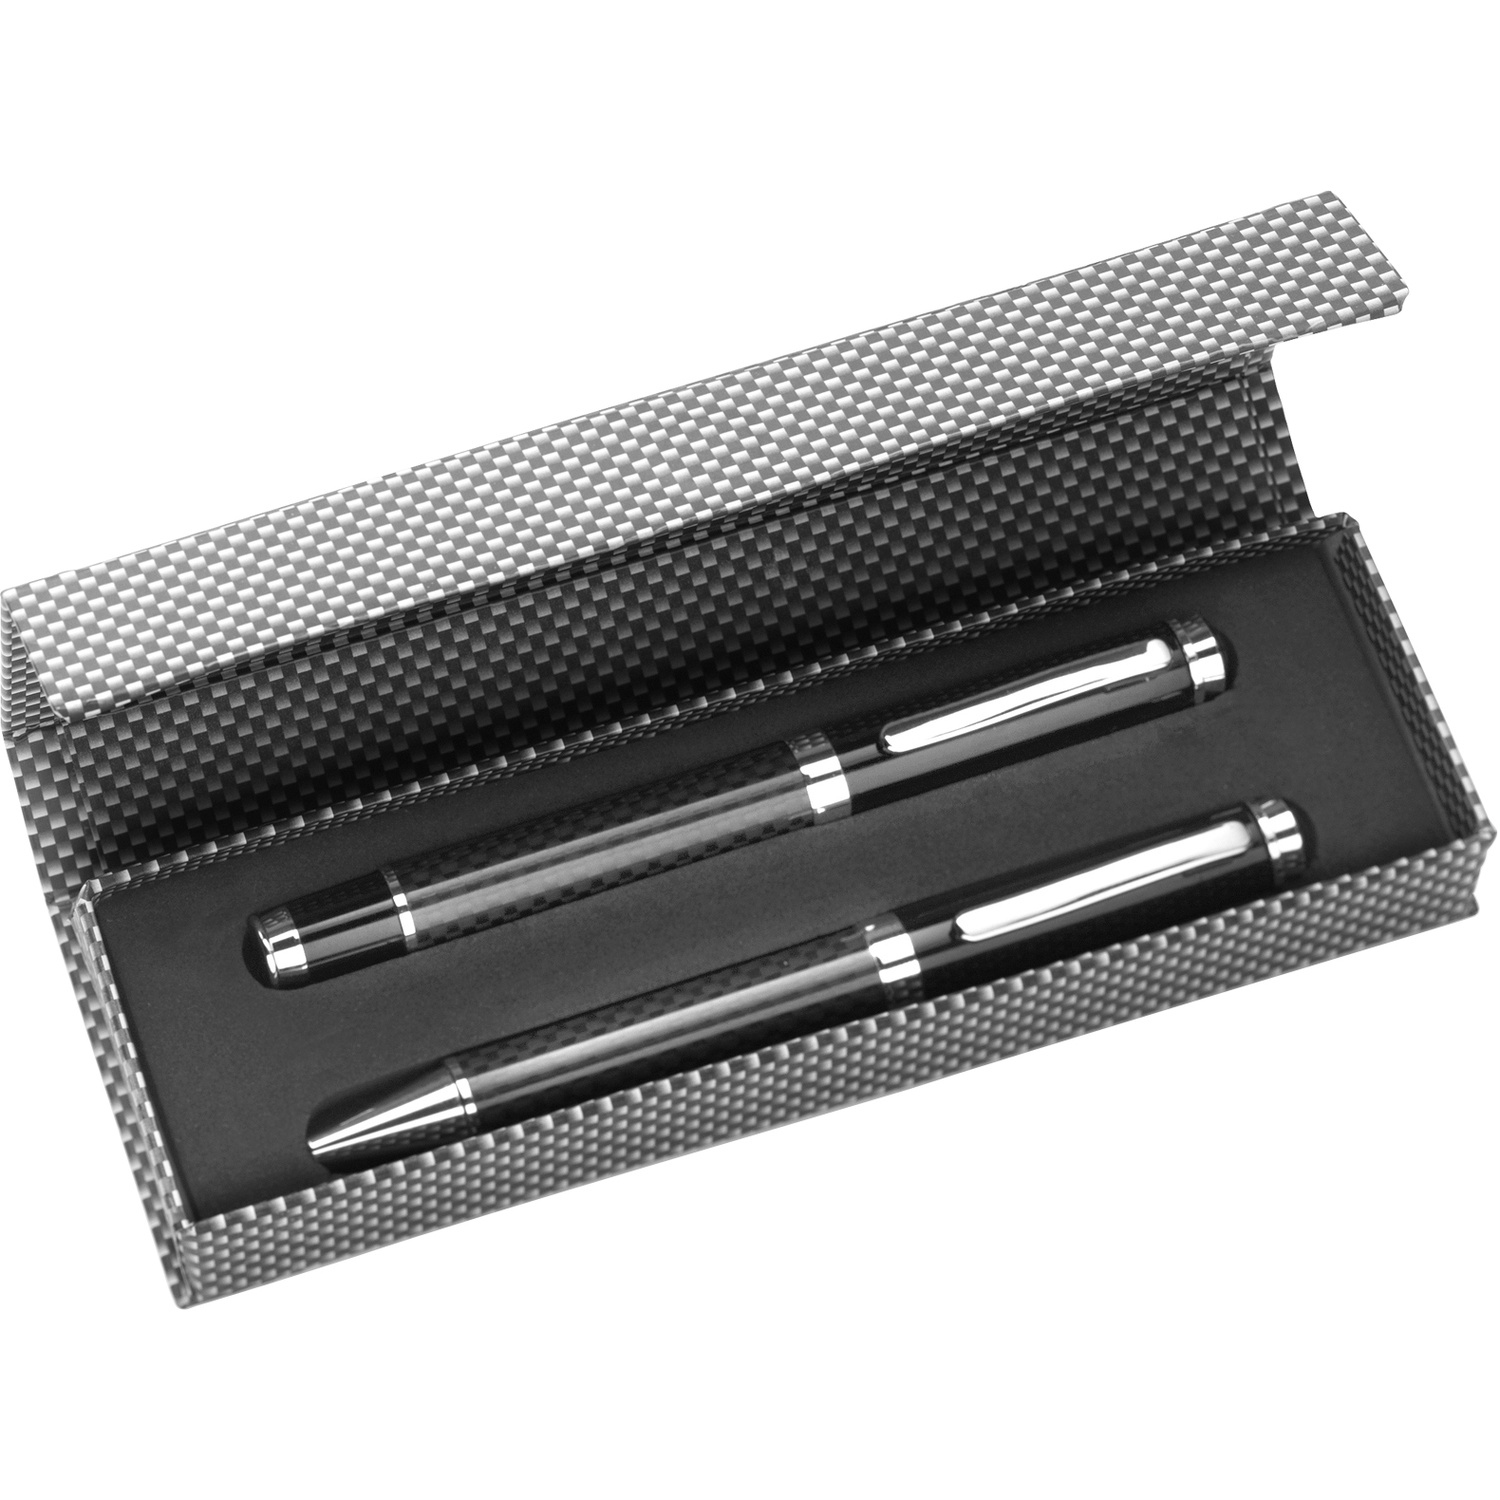 003337 001999999 3d135 gbo pro01 fal - Classic ballpen and rollerball